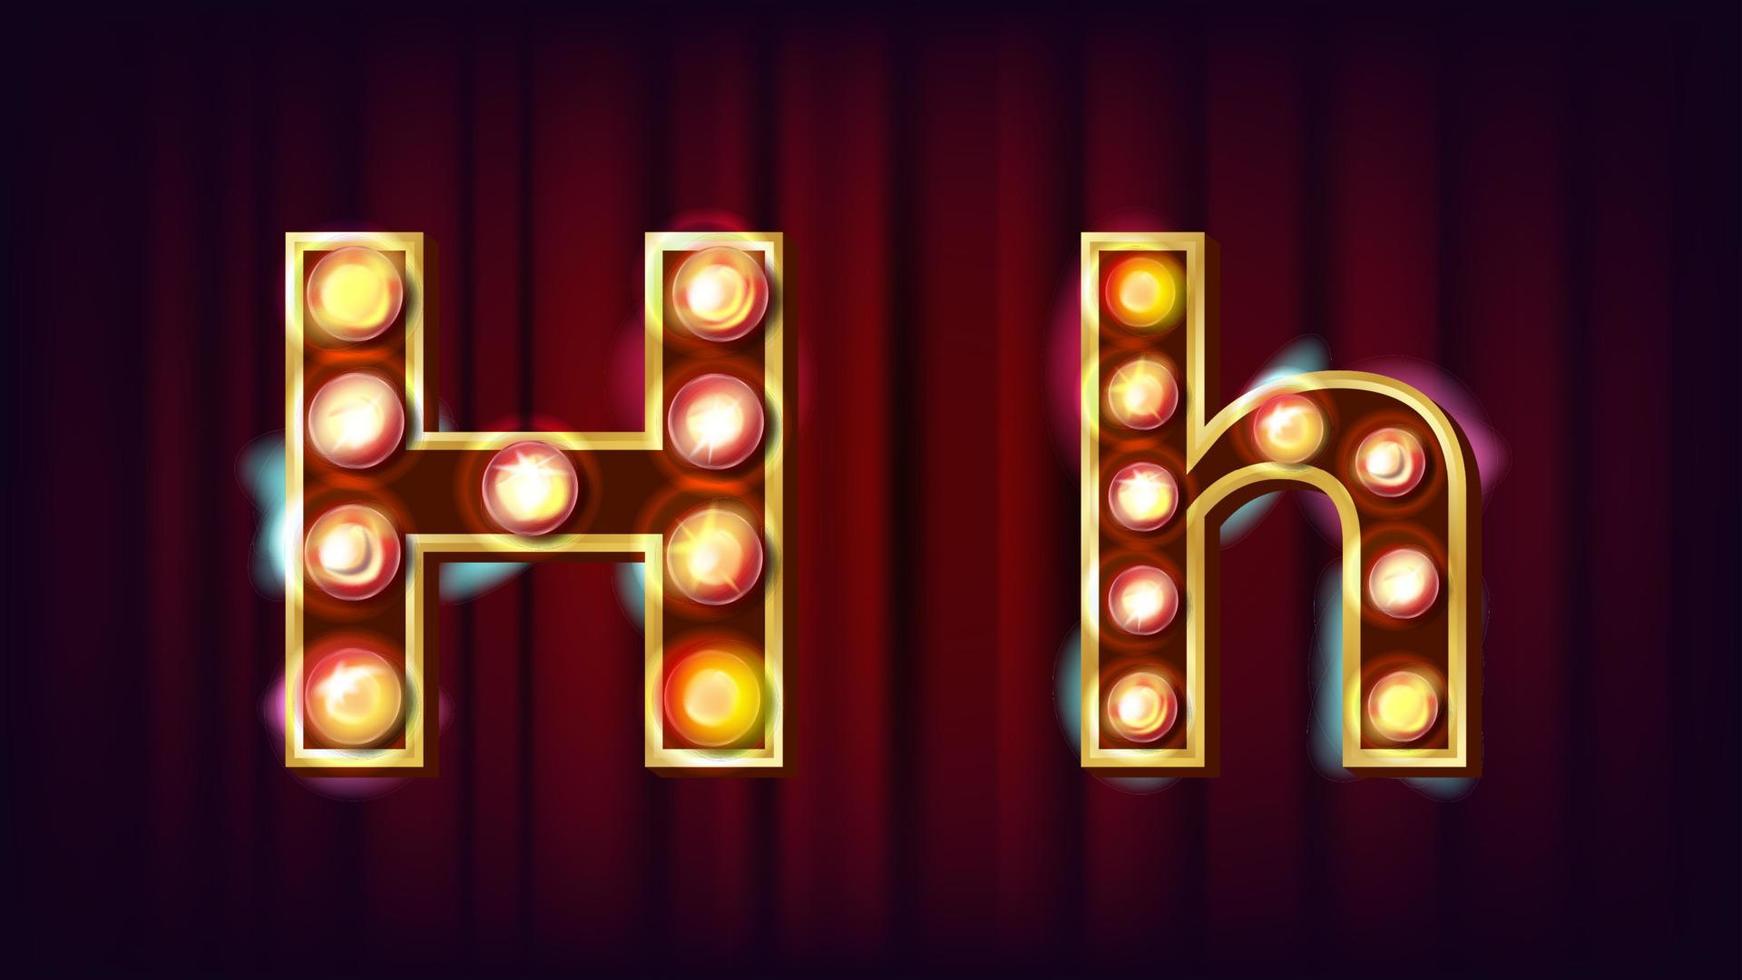 H Letter Vector. Capital, Lowercase. Font Marquee Light Sign. Retro Shine Lamp Bulb Alphabet. 3D Electric Glowing Digit. Vintage Gold Illuminated Light. Carnival, Circus, Casino Style. Illustration vector